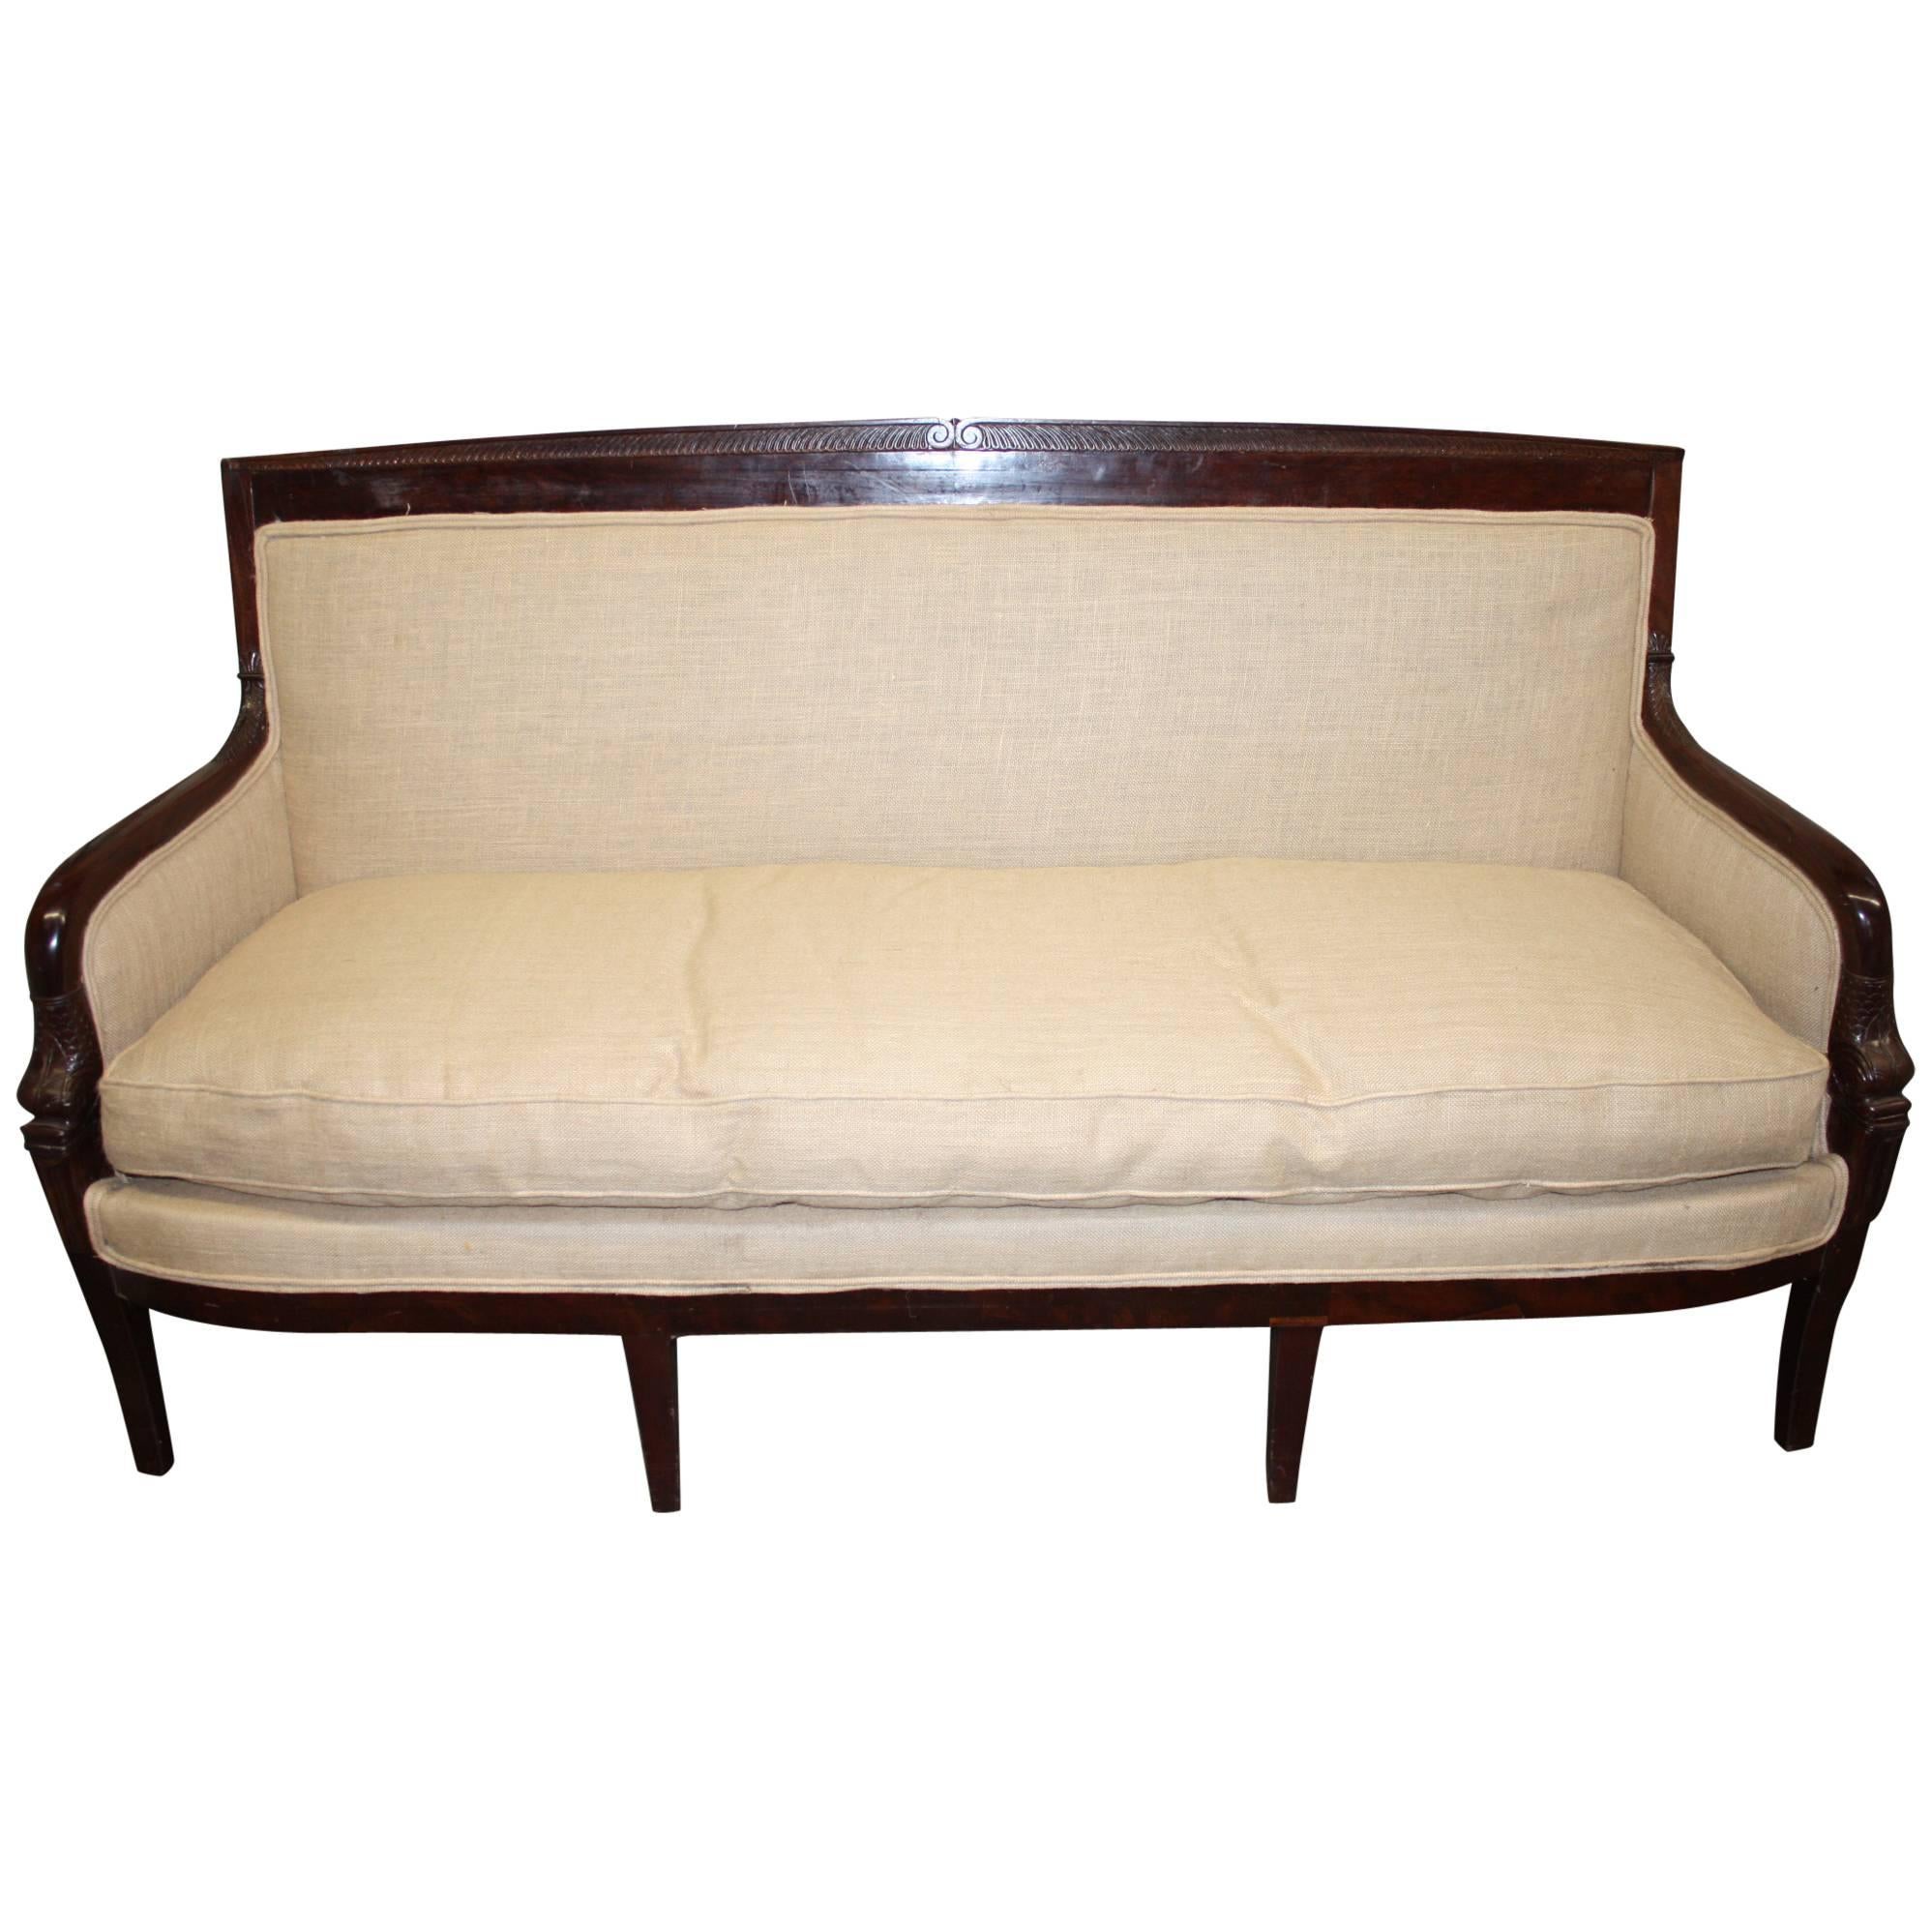 Duncan Phyfe Federal Period Sofa For Sale at 1stDibs